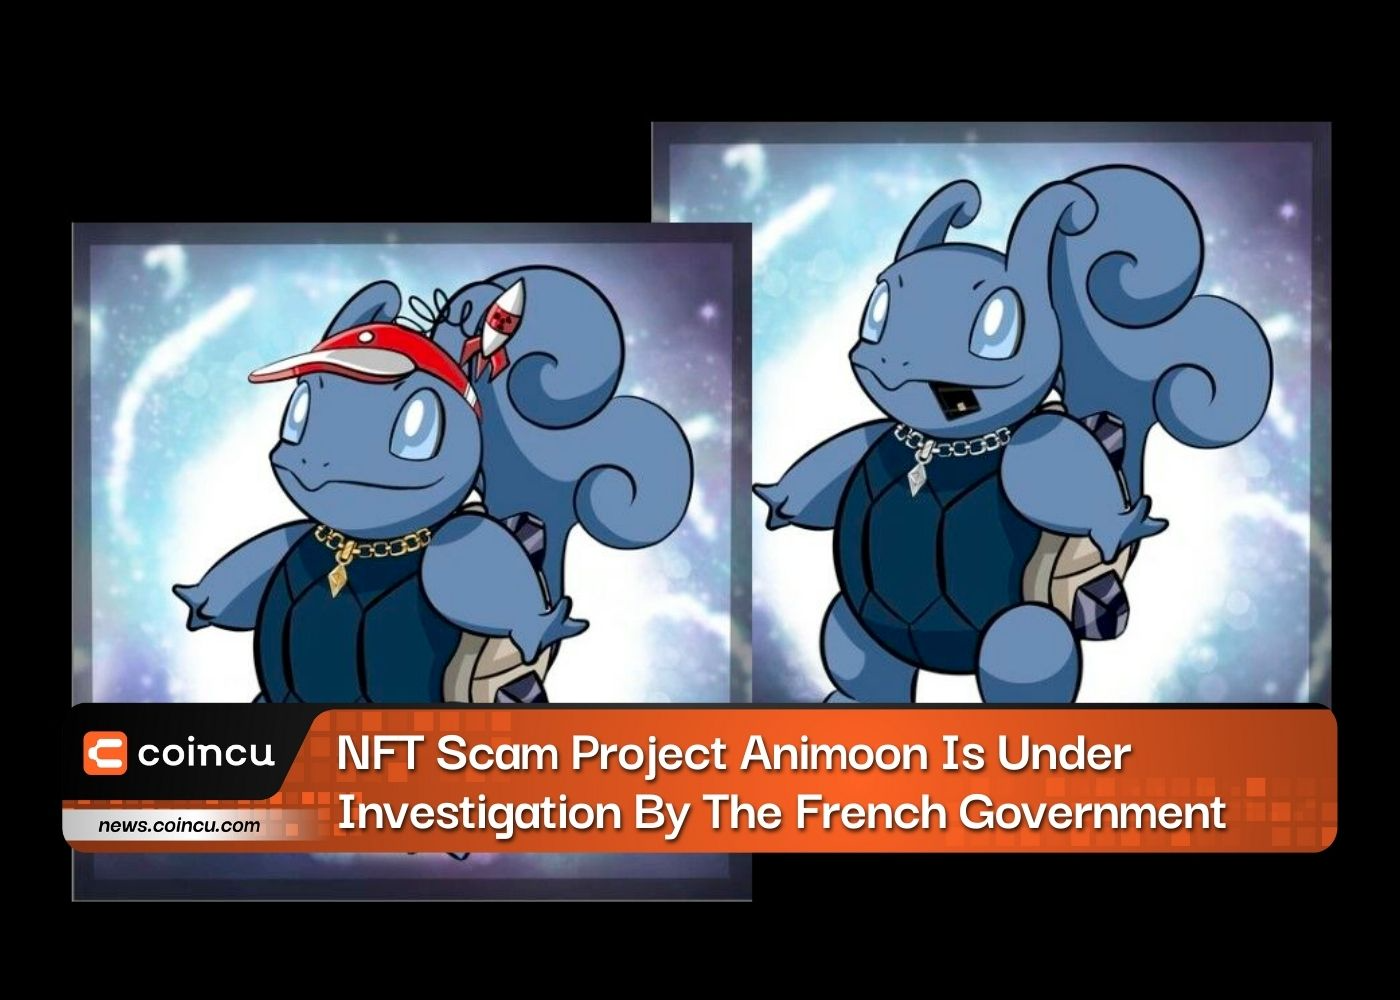 NFT Scam Project Animoon Is Under Investigation By The French Government